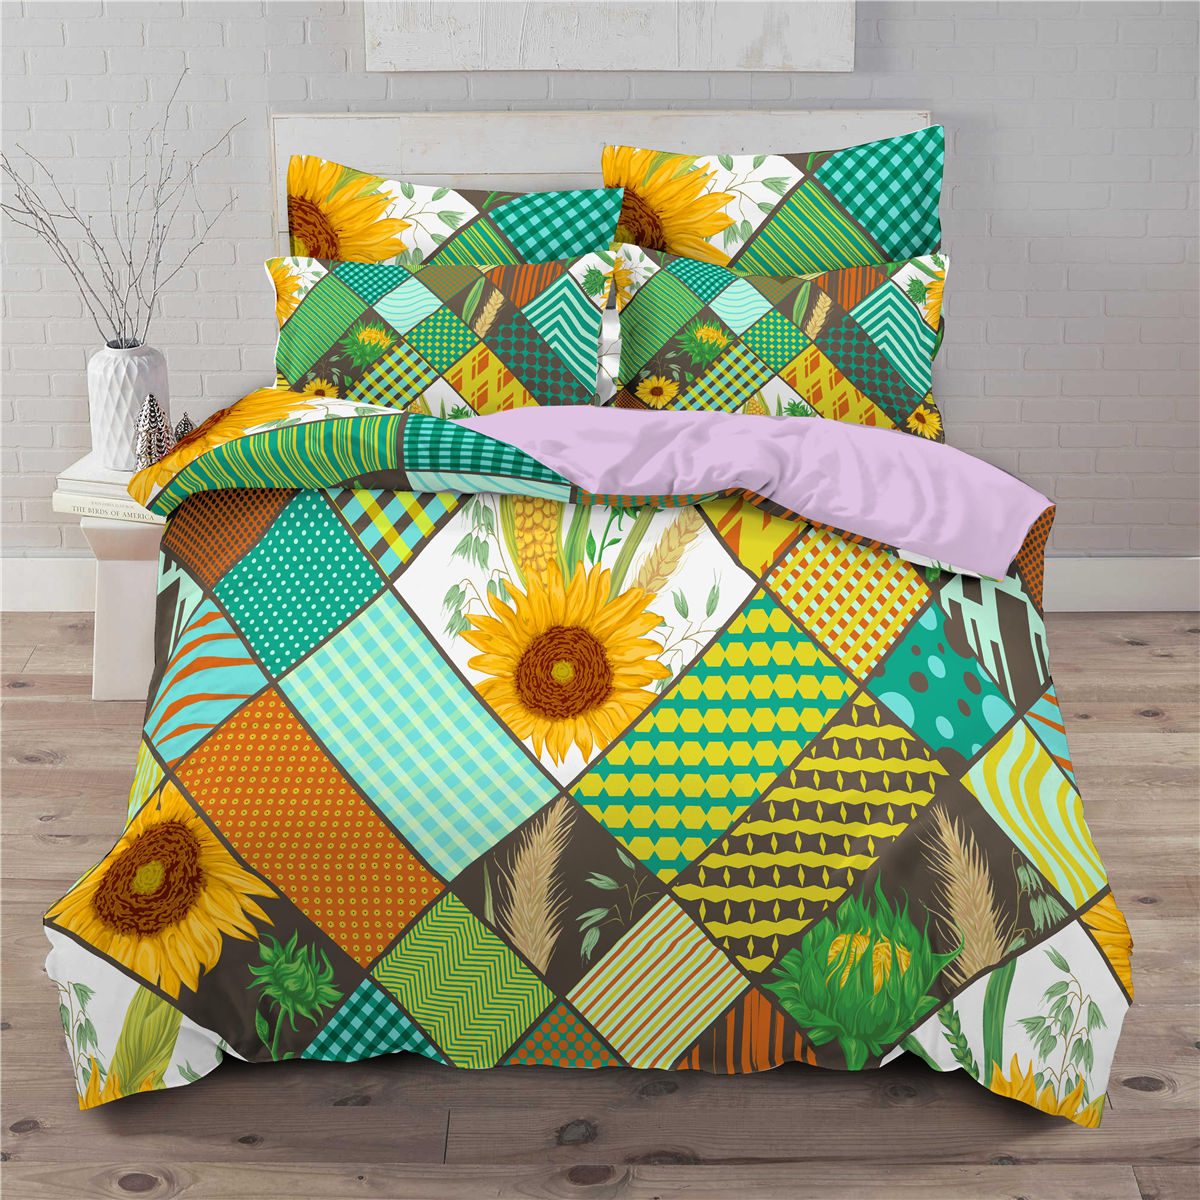 3 piece bedding set with sunflower pattern 3D digital printing quilt set - TRIPLE AAA Fashion Collection